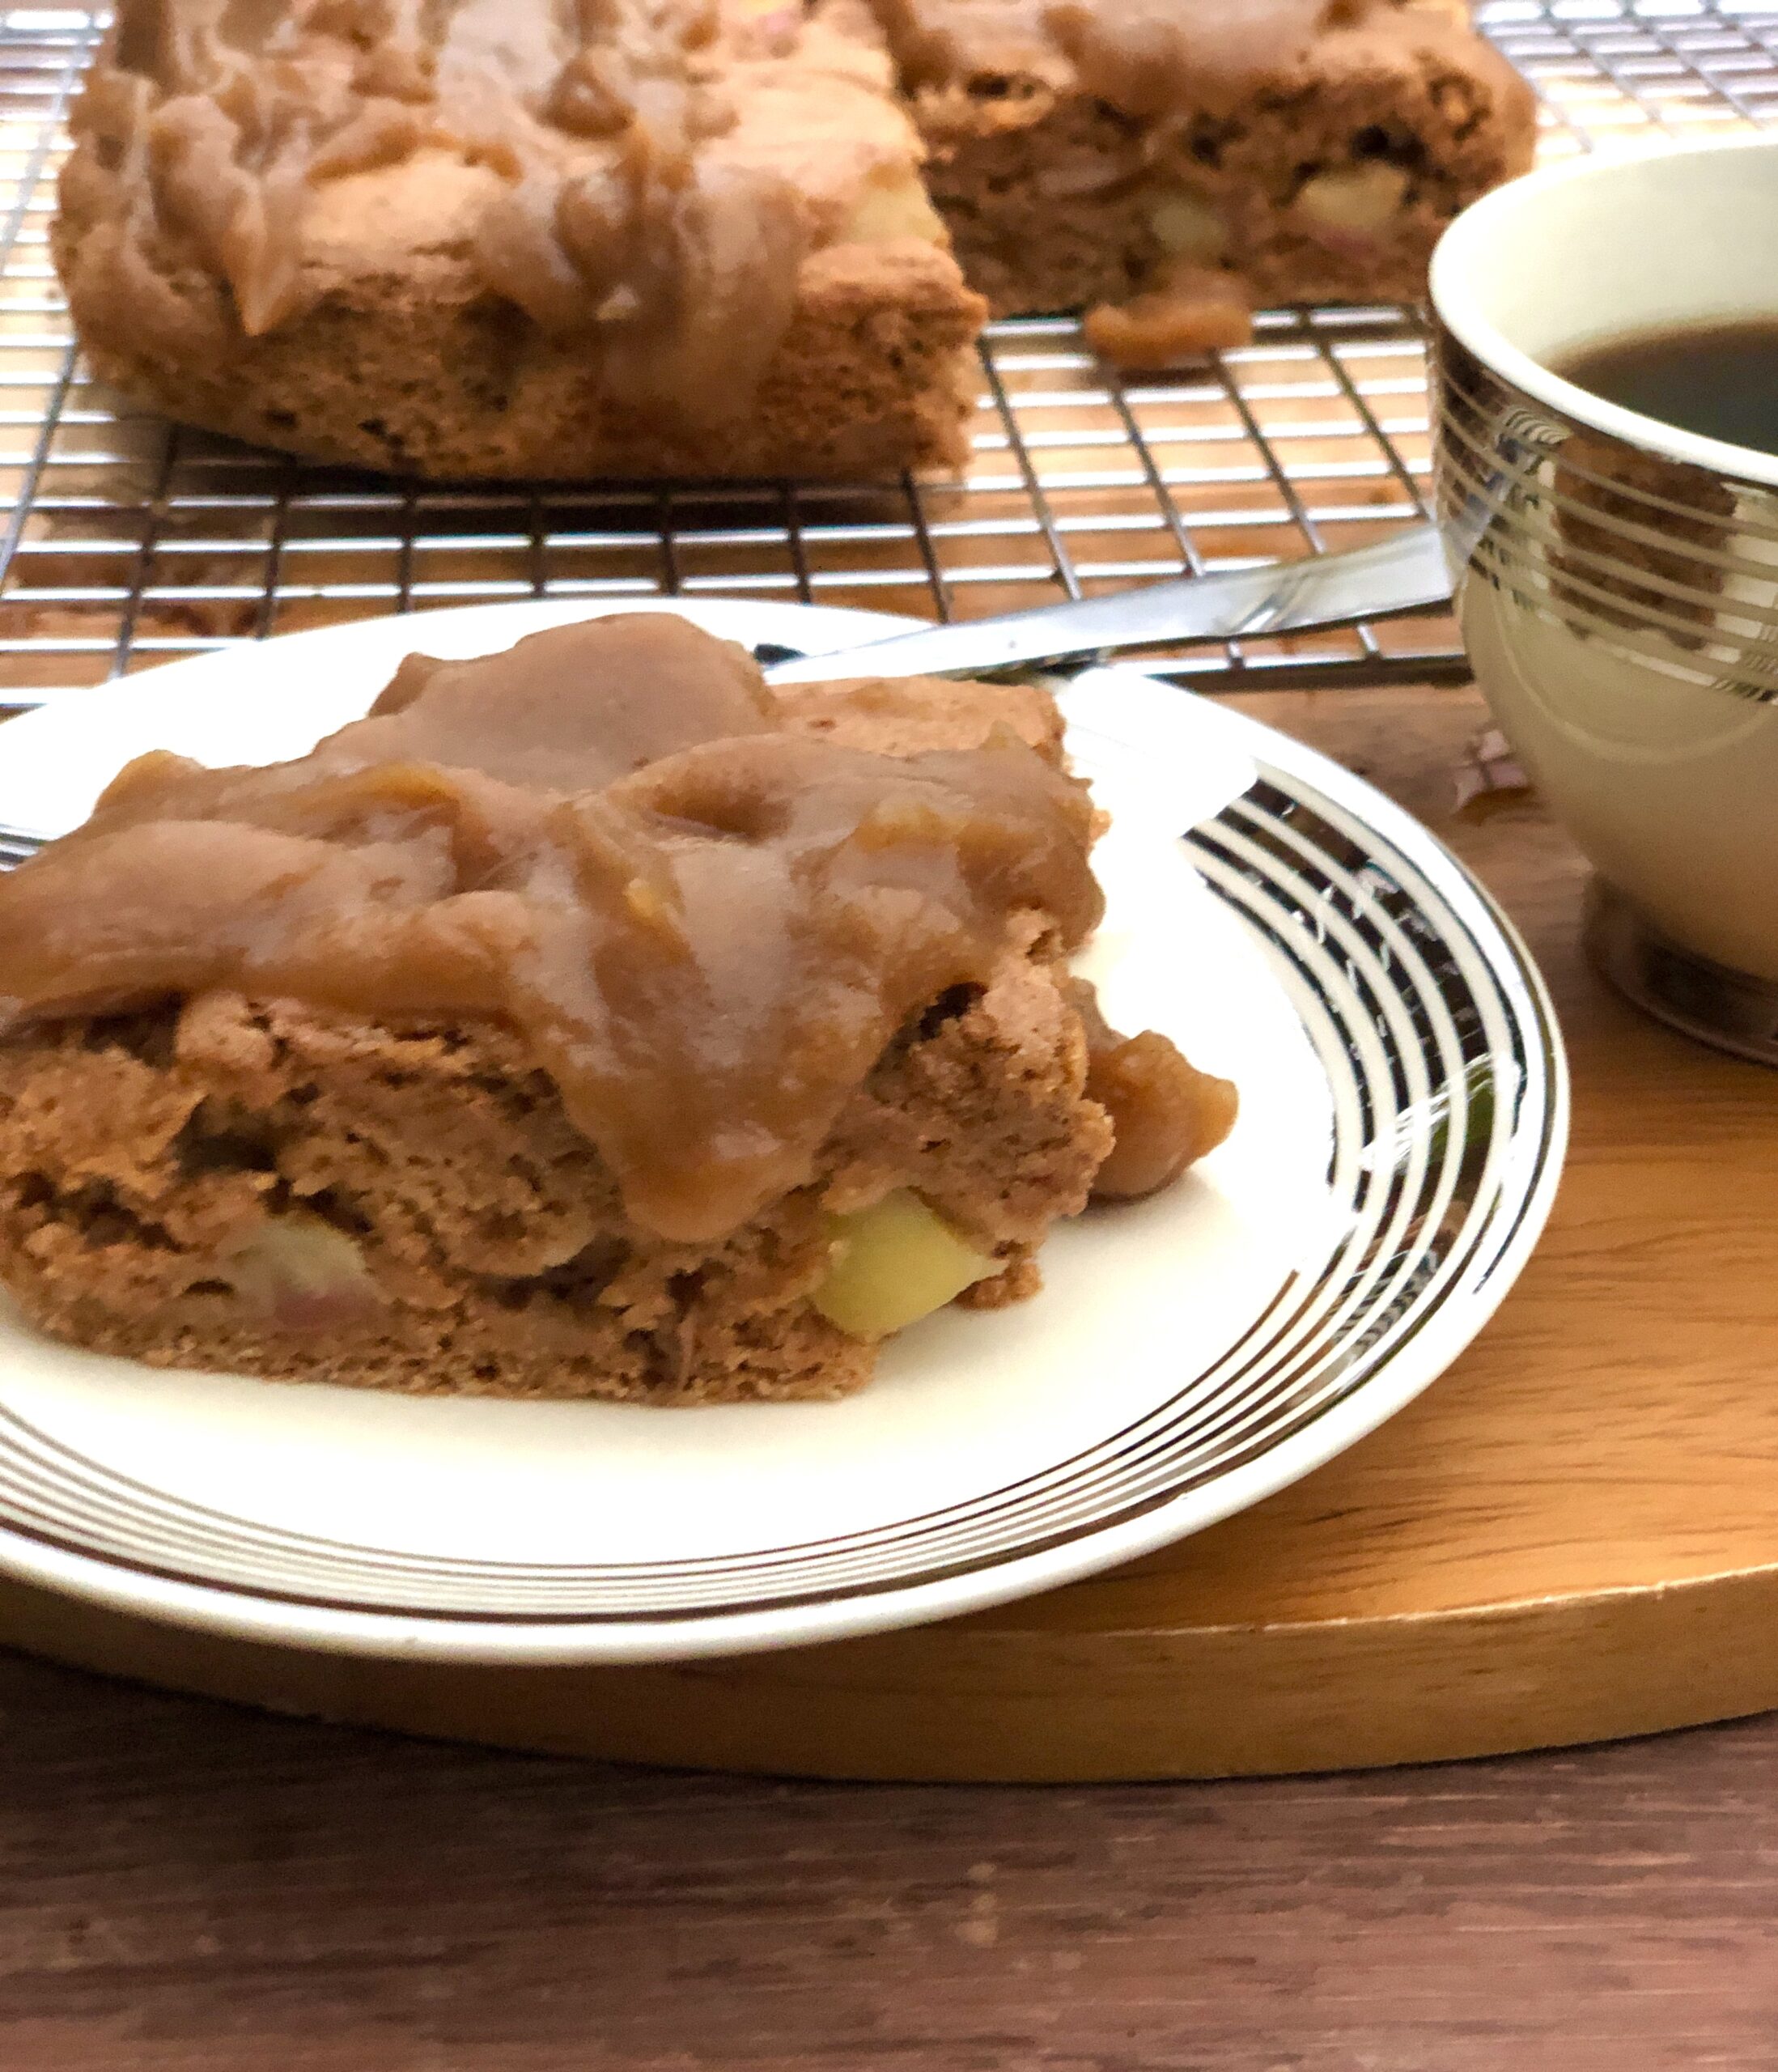 A piece of apple cake drizzled with date caramel sitting on a small plate. A cup of coffee is next to it and the rest of the cake sits behind the small plate of cake and coffee cup